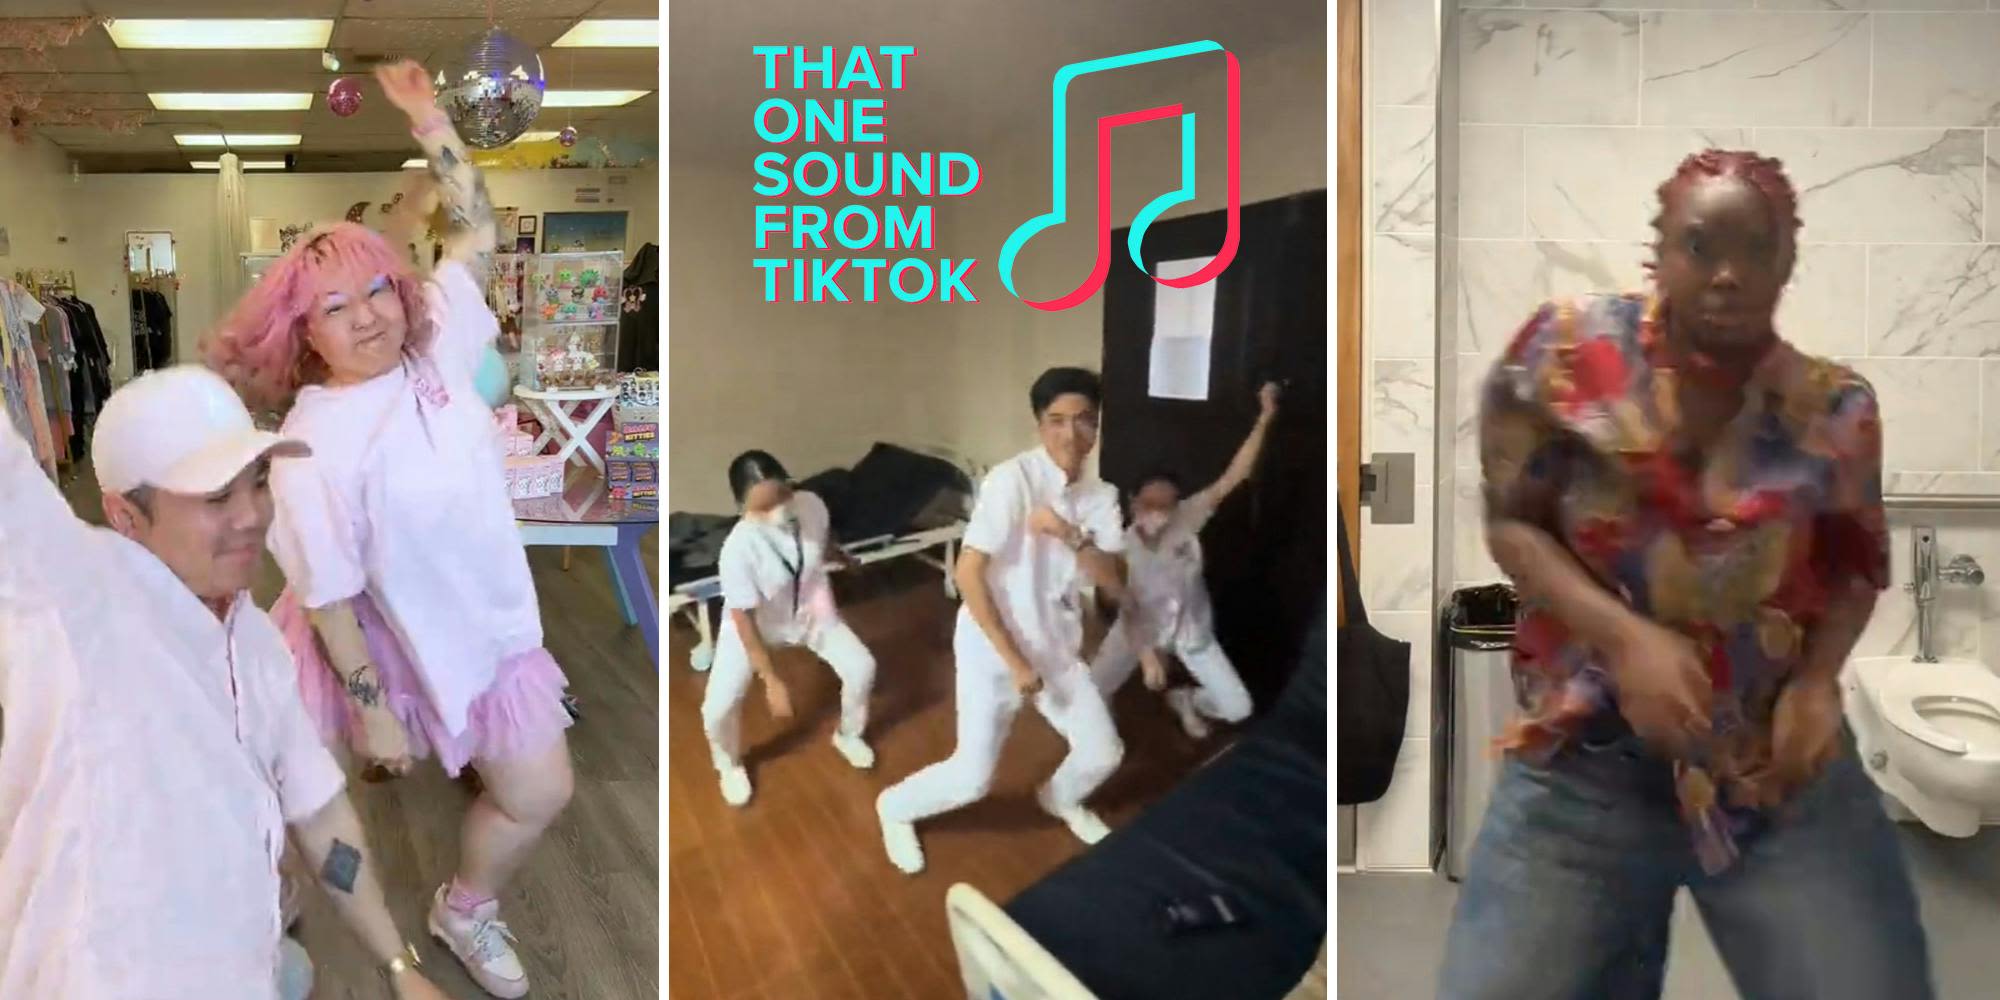 'Paging Dr Beat': This remixed club classic from the '80s is suddenly all over TikTok. Why?